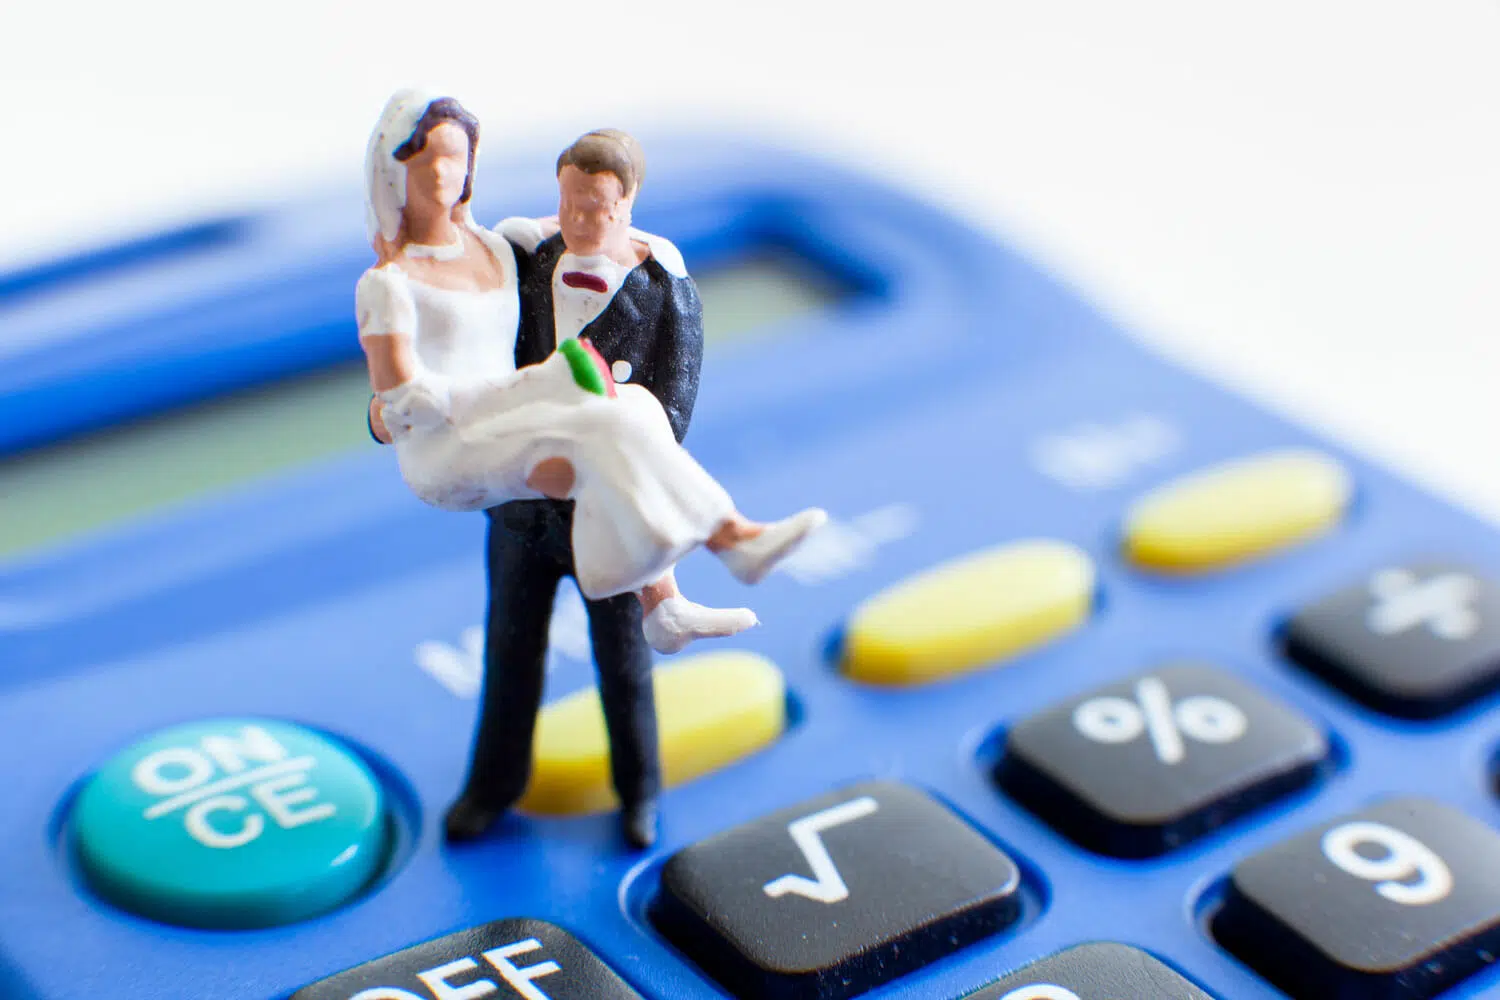 does alimony continue after I get remarried?